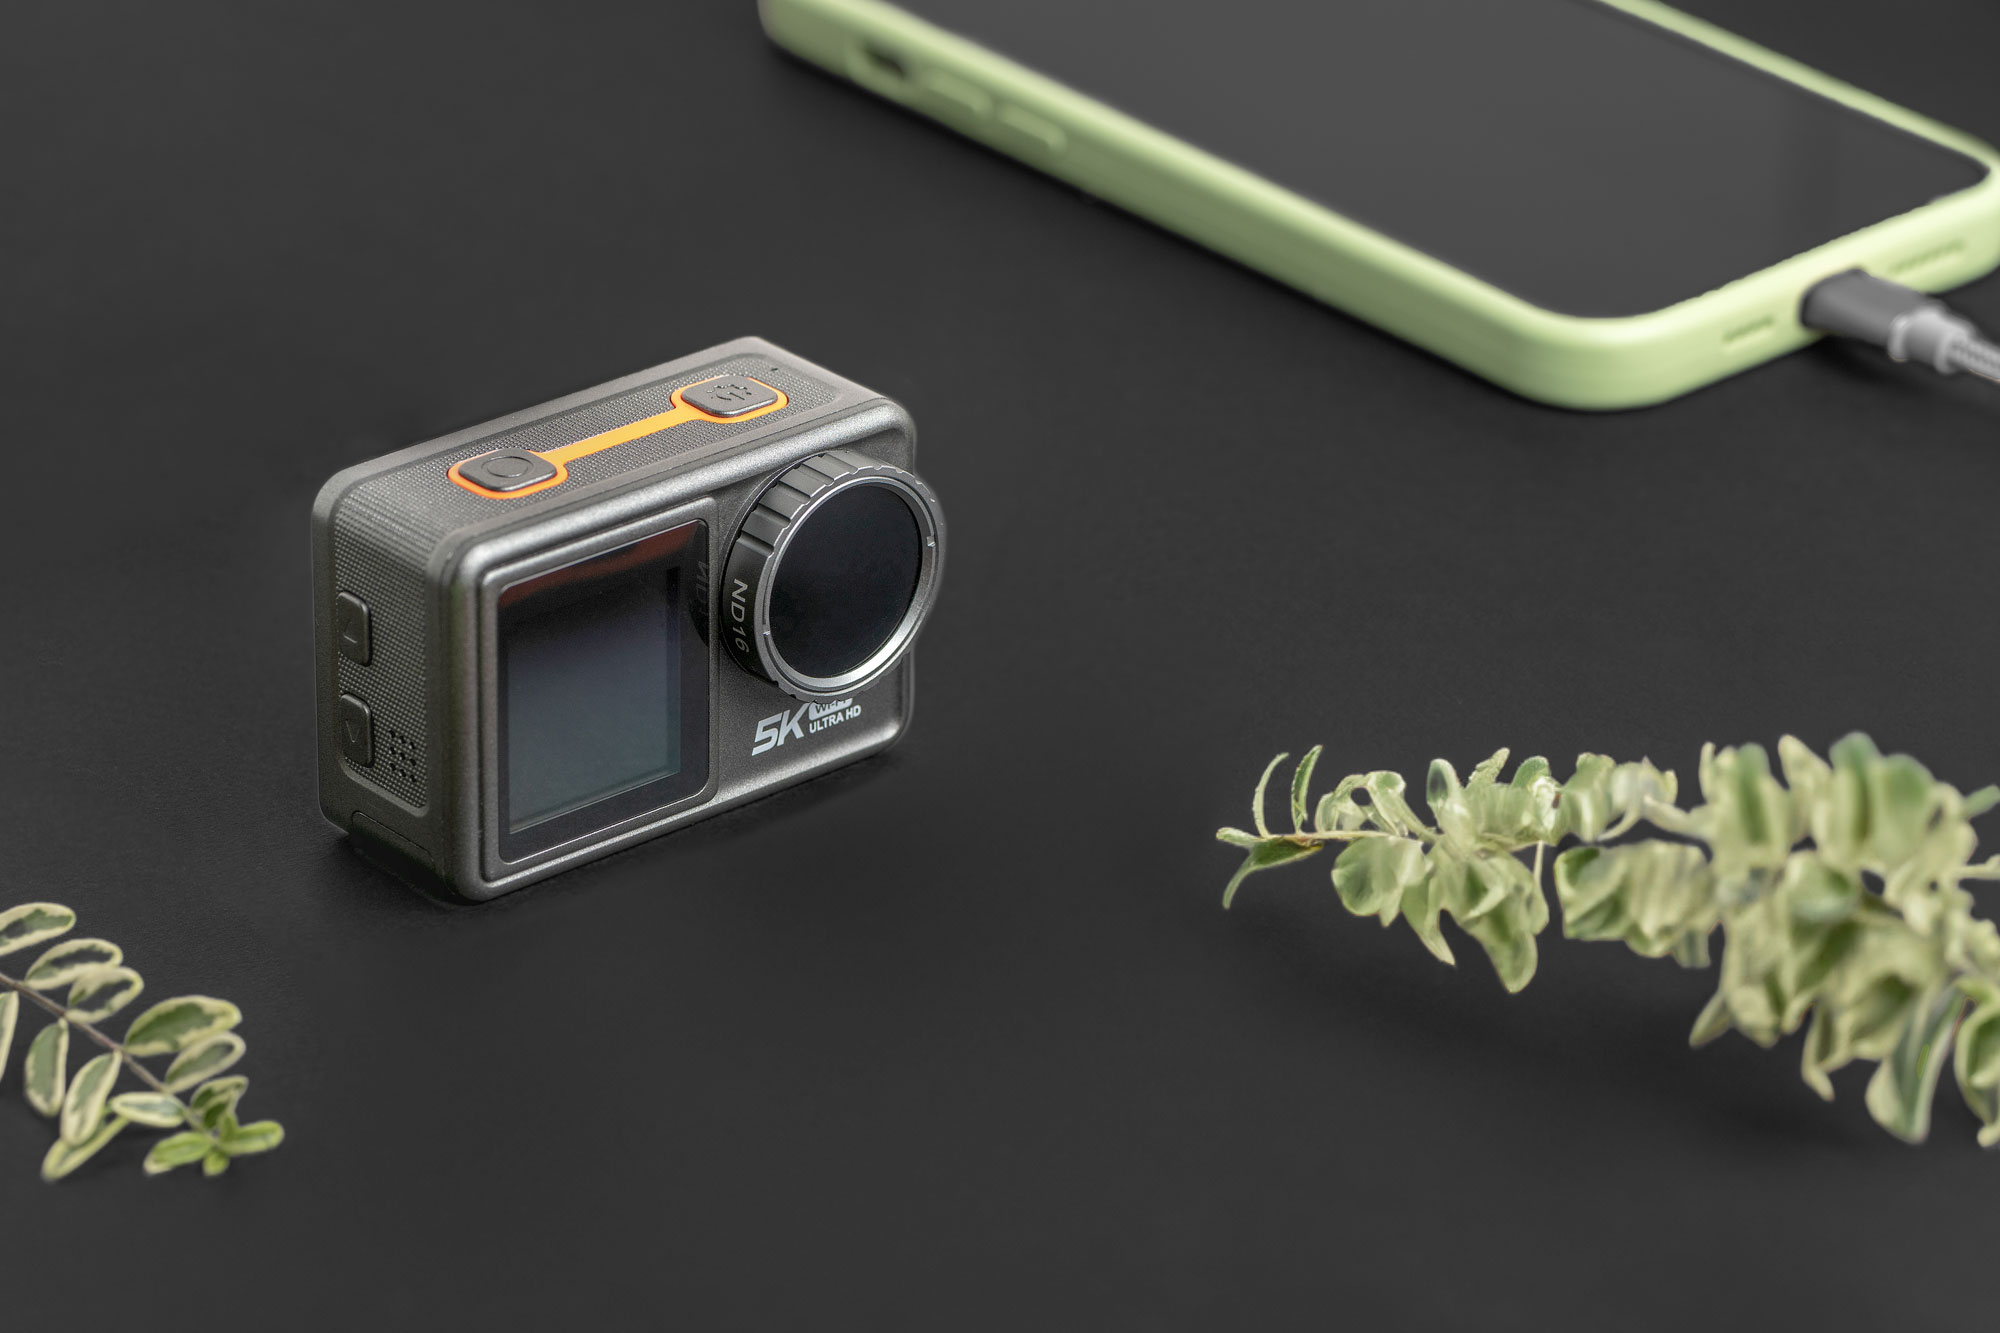 How To Transfer Photos From Action Camera